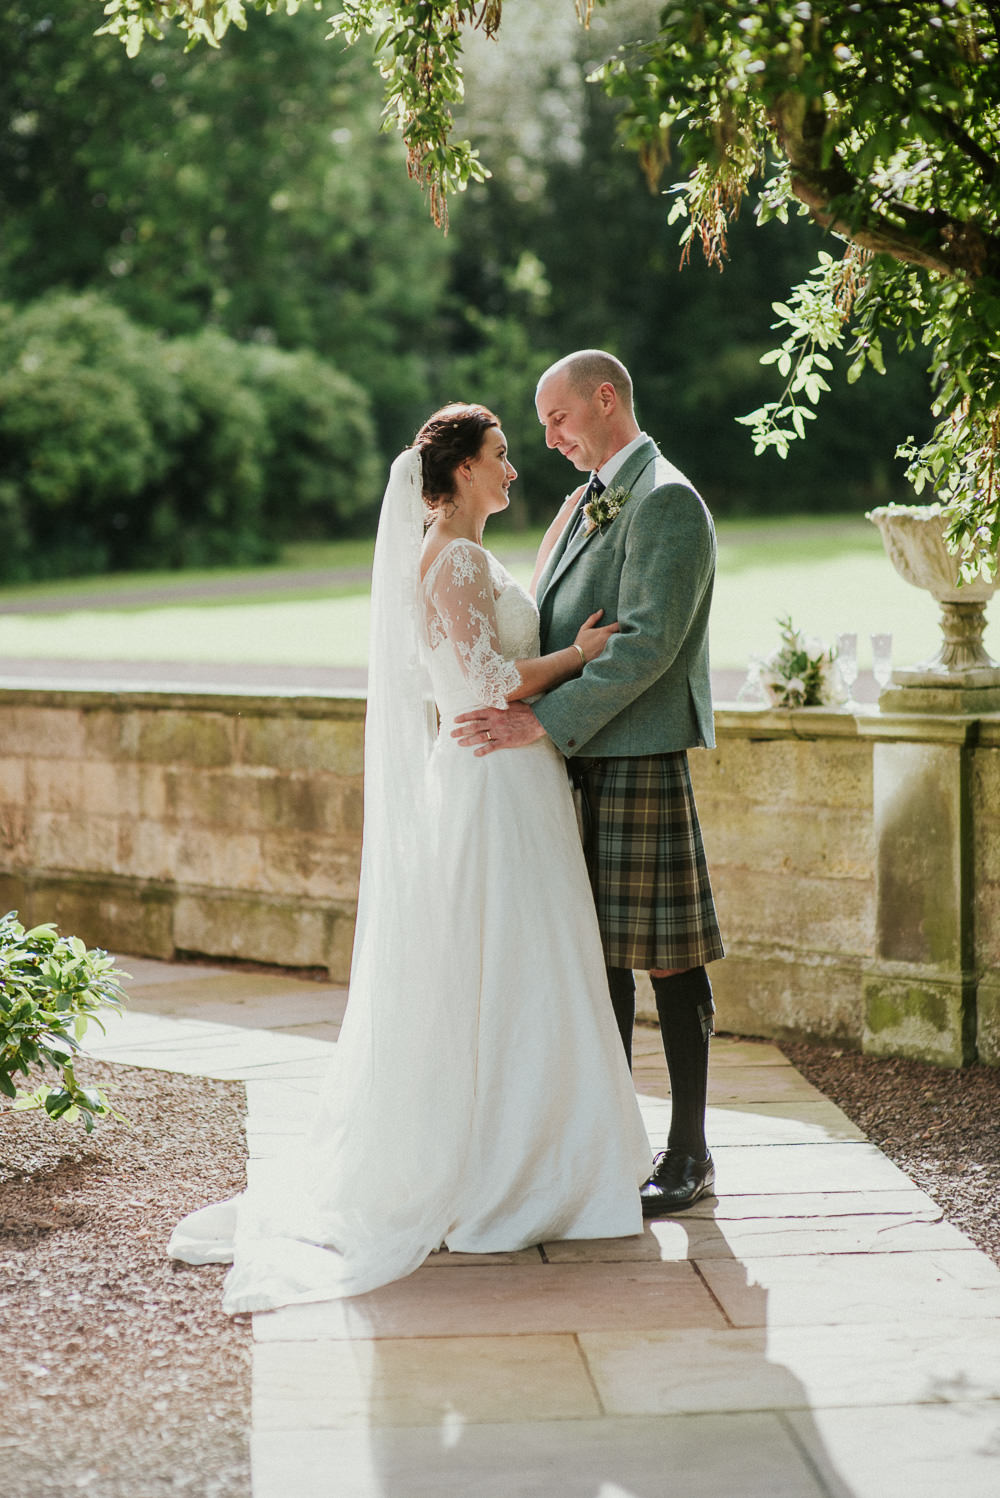 The bride was wearing an illusion neckline wedding dress with half sleeves and a veil, the groom was wearing a jacket and a traditional kilt, all in matching colors